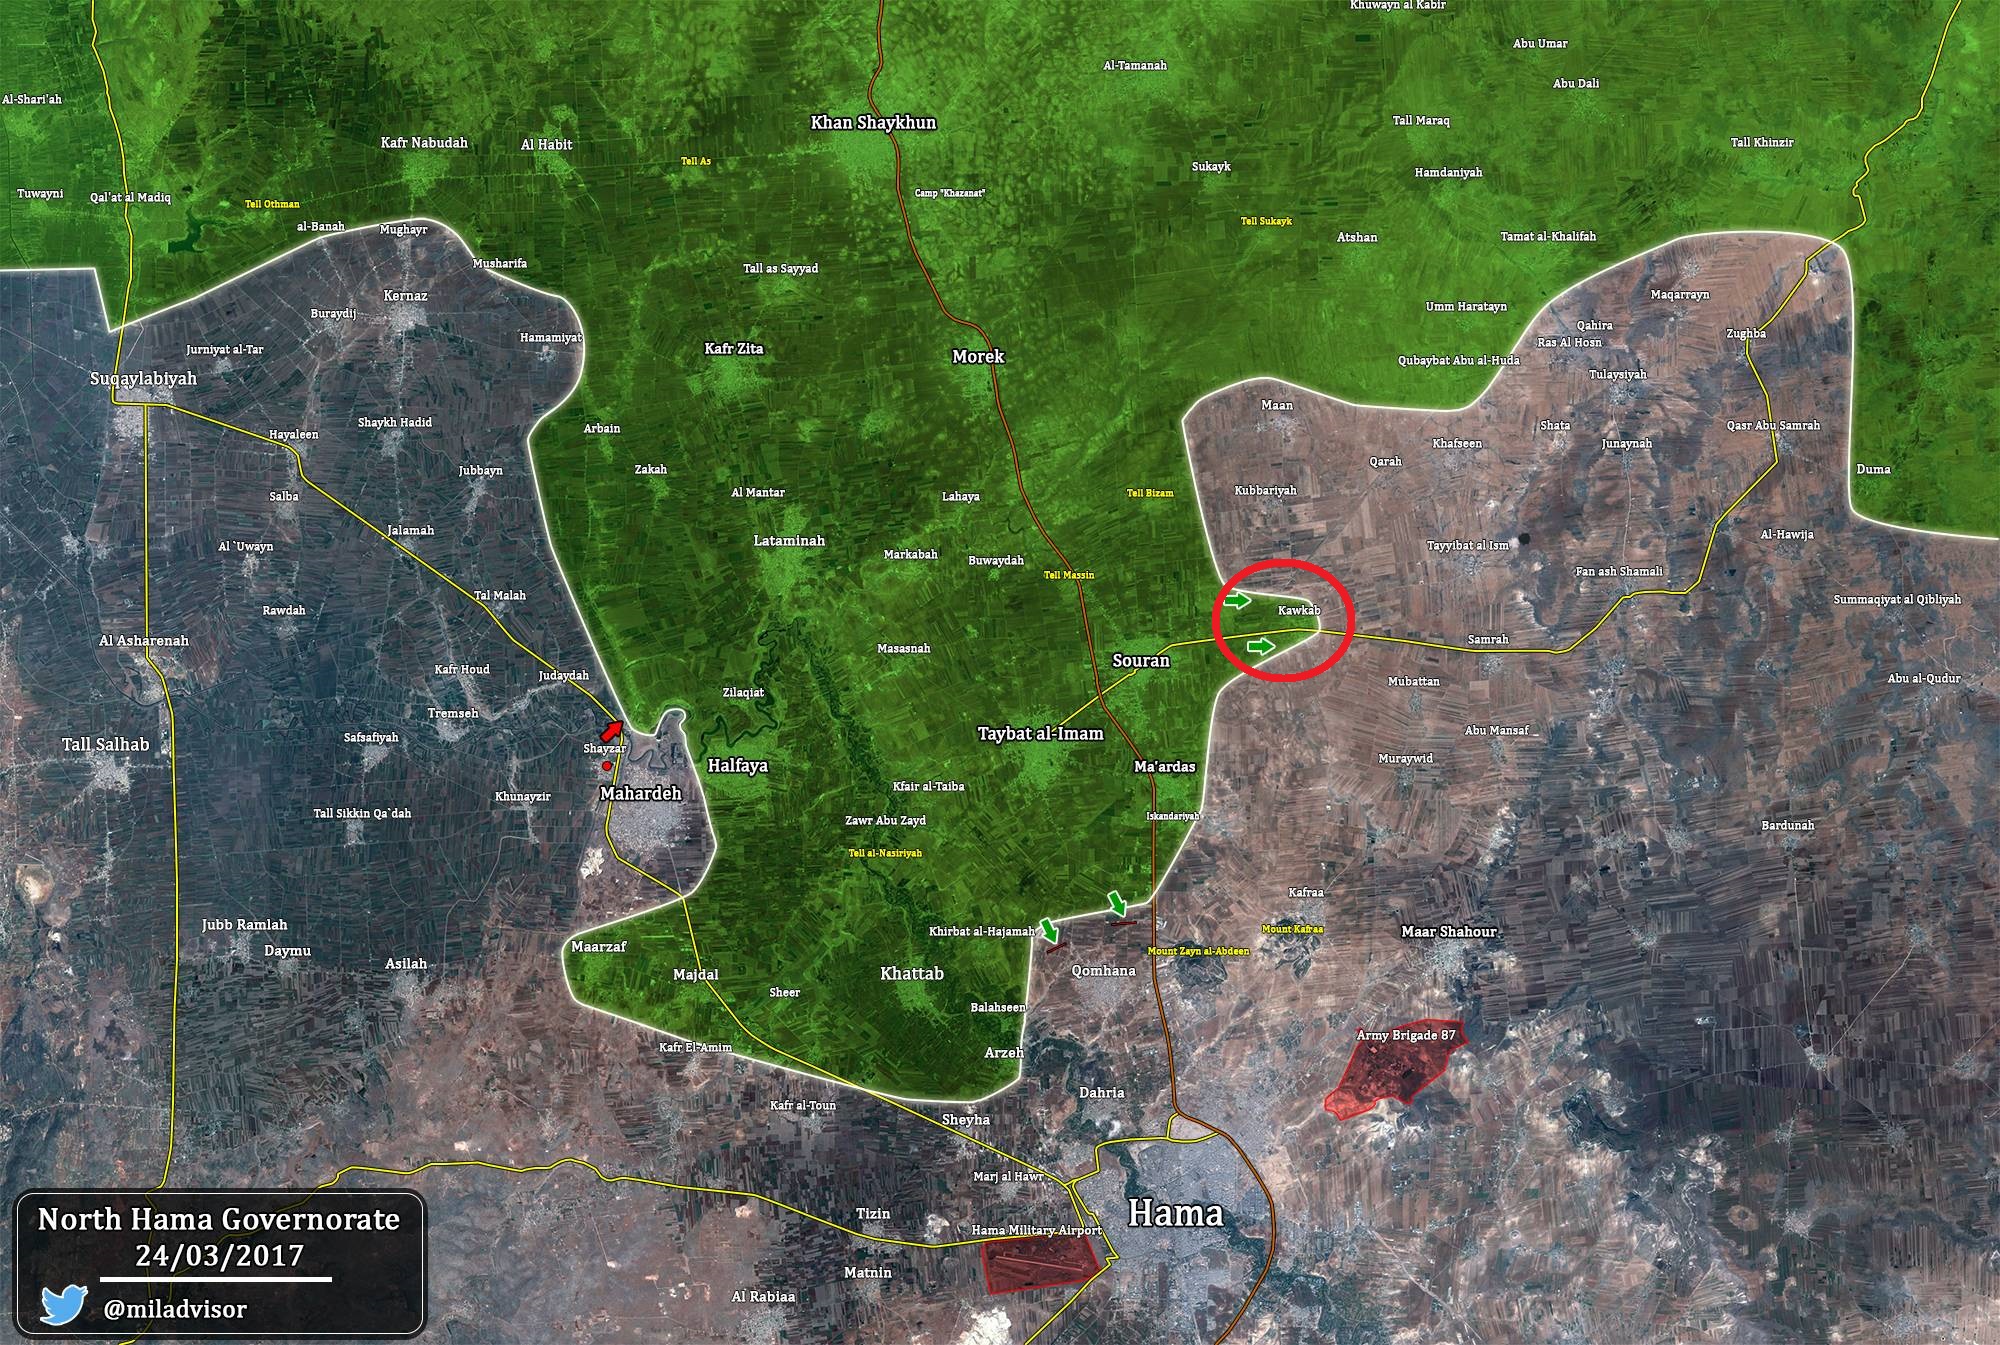 Syrian Army Regained Kawkab Town From Militants In Northern Hama - Reports